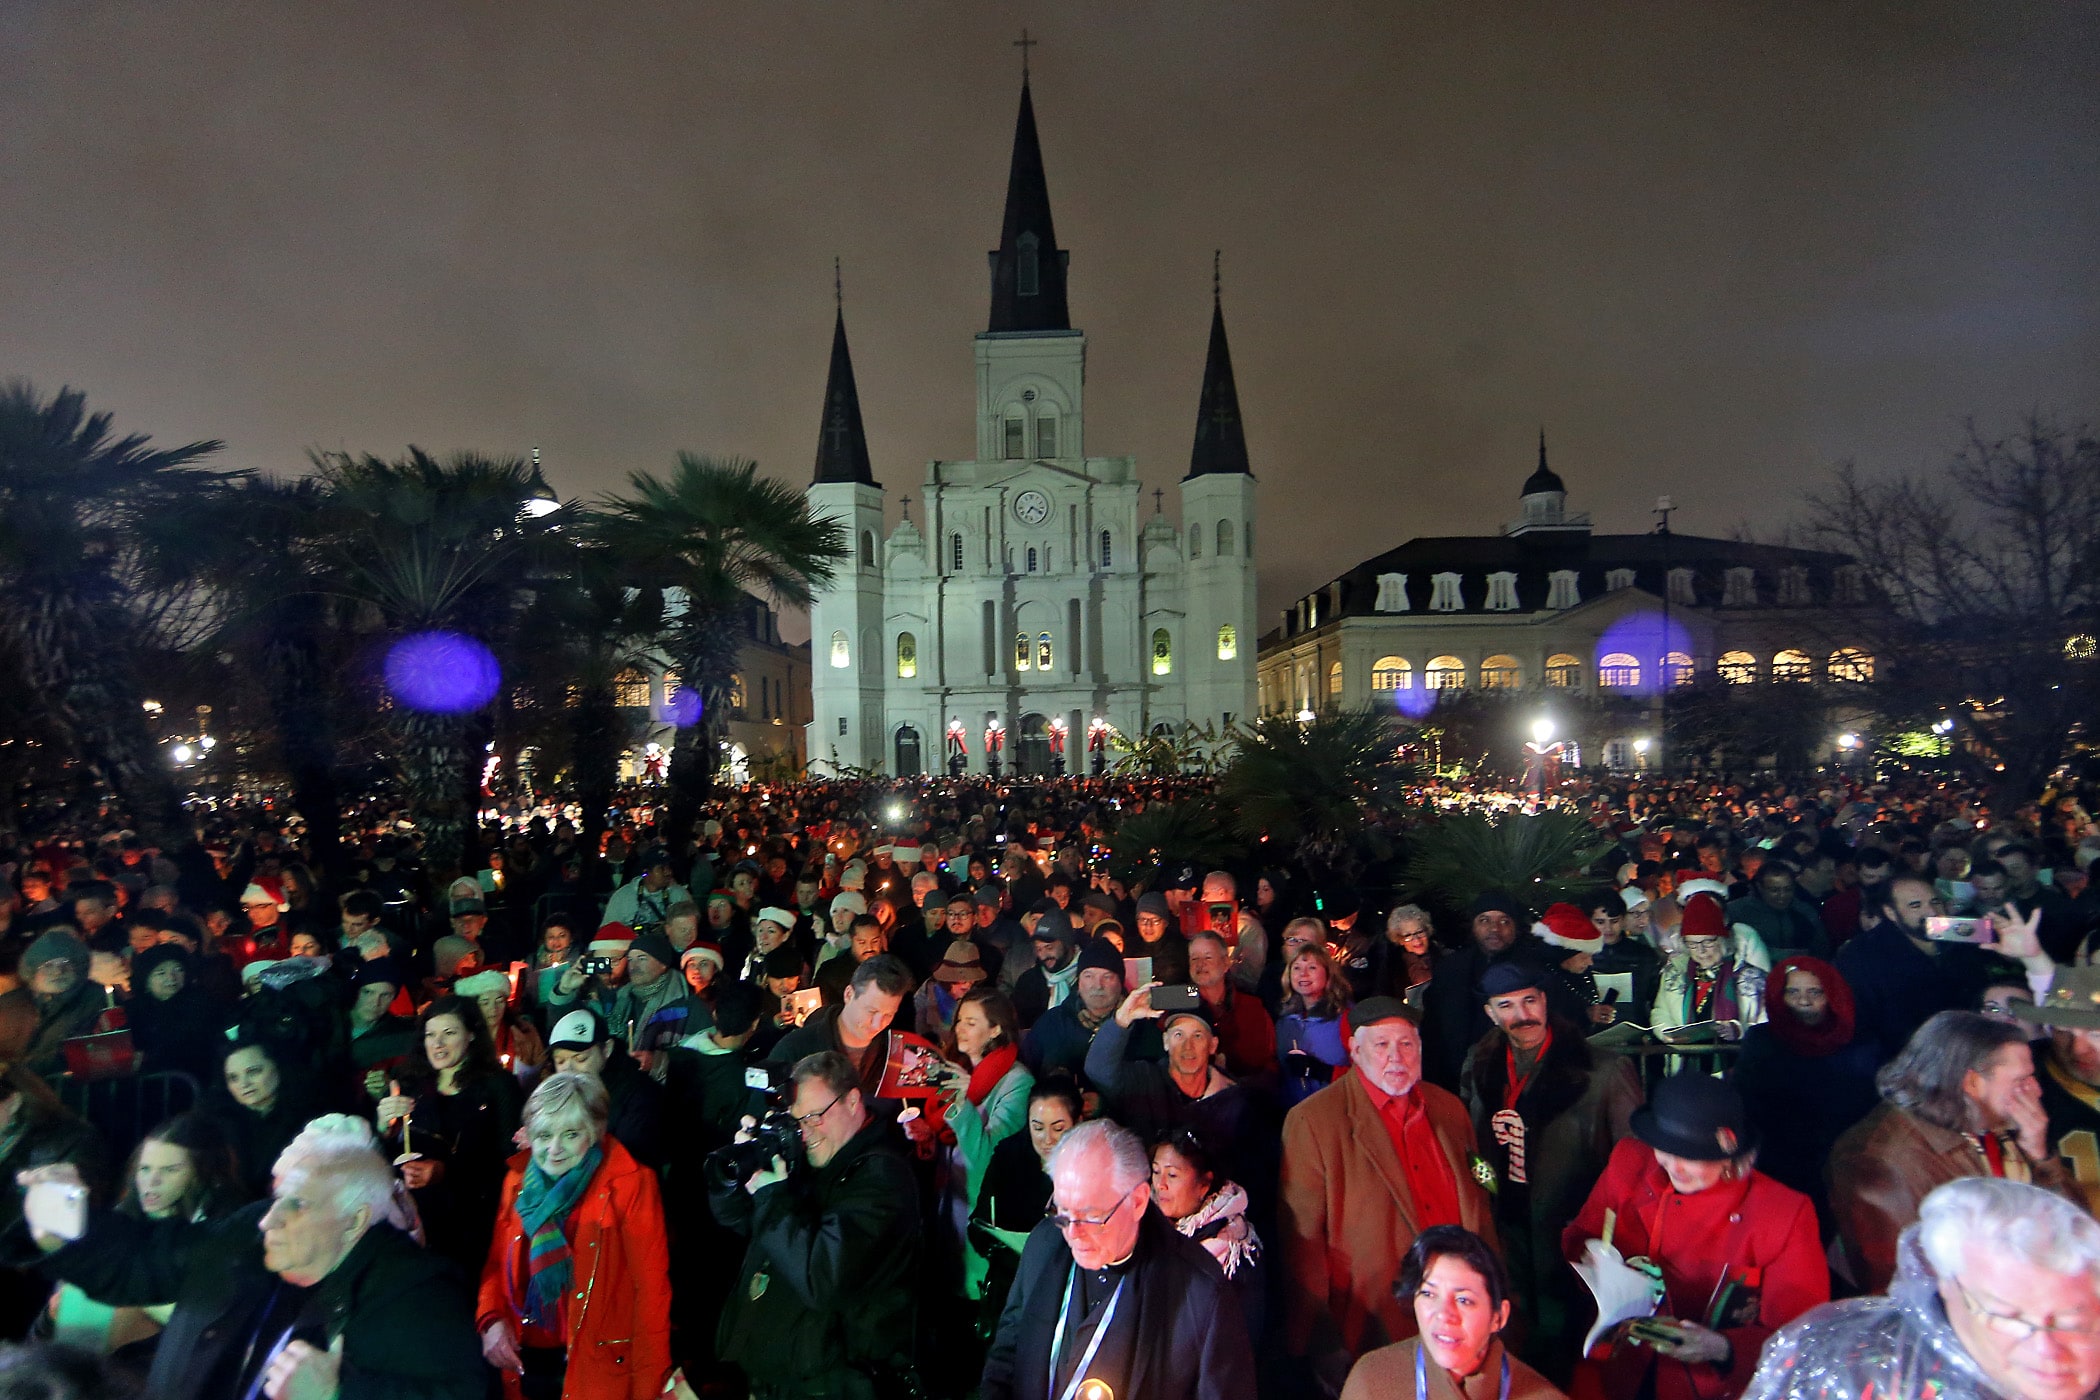 Hundreds of people turned out for the annual Caroling in Jackson Square, a New Orleans tradition since1946, on Sunday, December 22, 2019. Sponsored by Patio Planters of the Vieux Carre, the free event featured the singing of Christmas songs by candlelight.